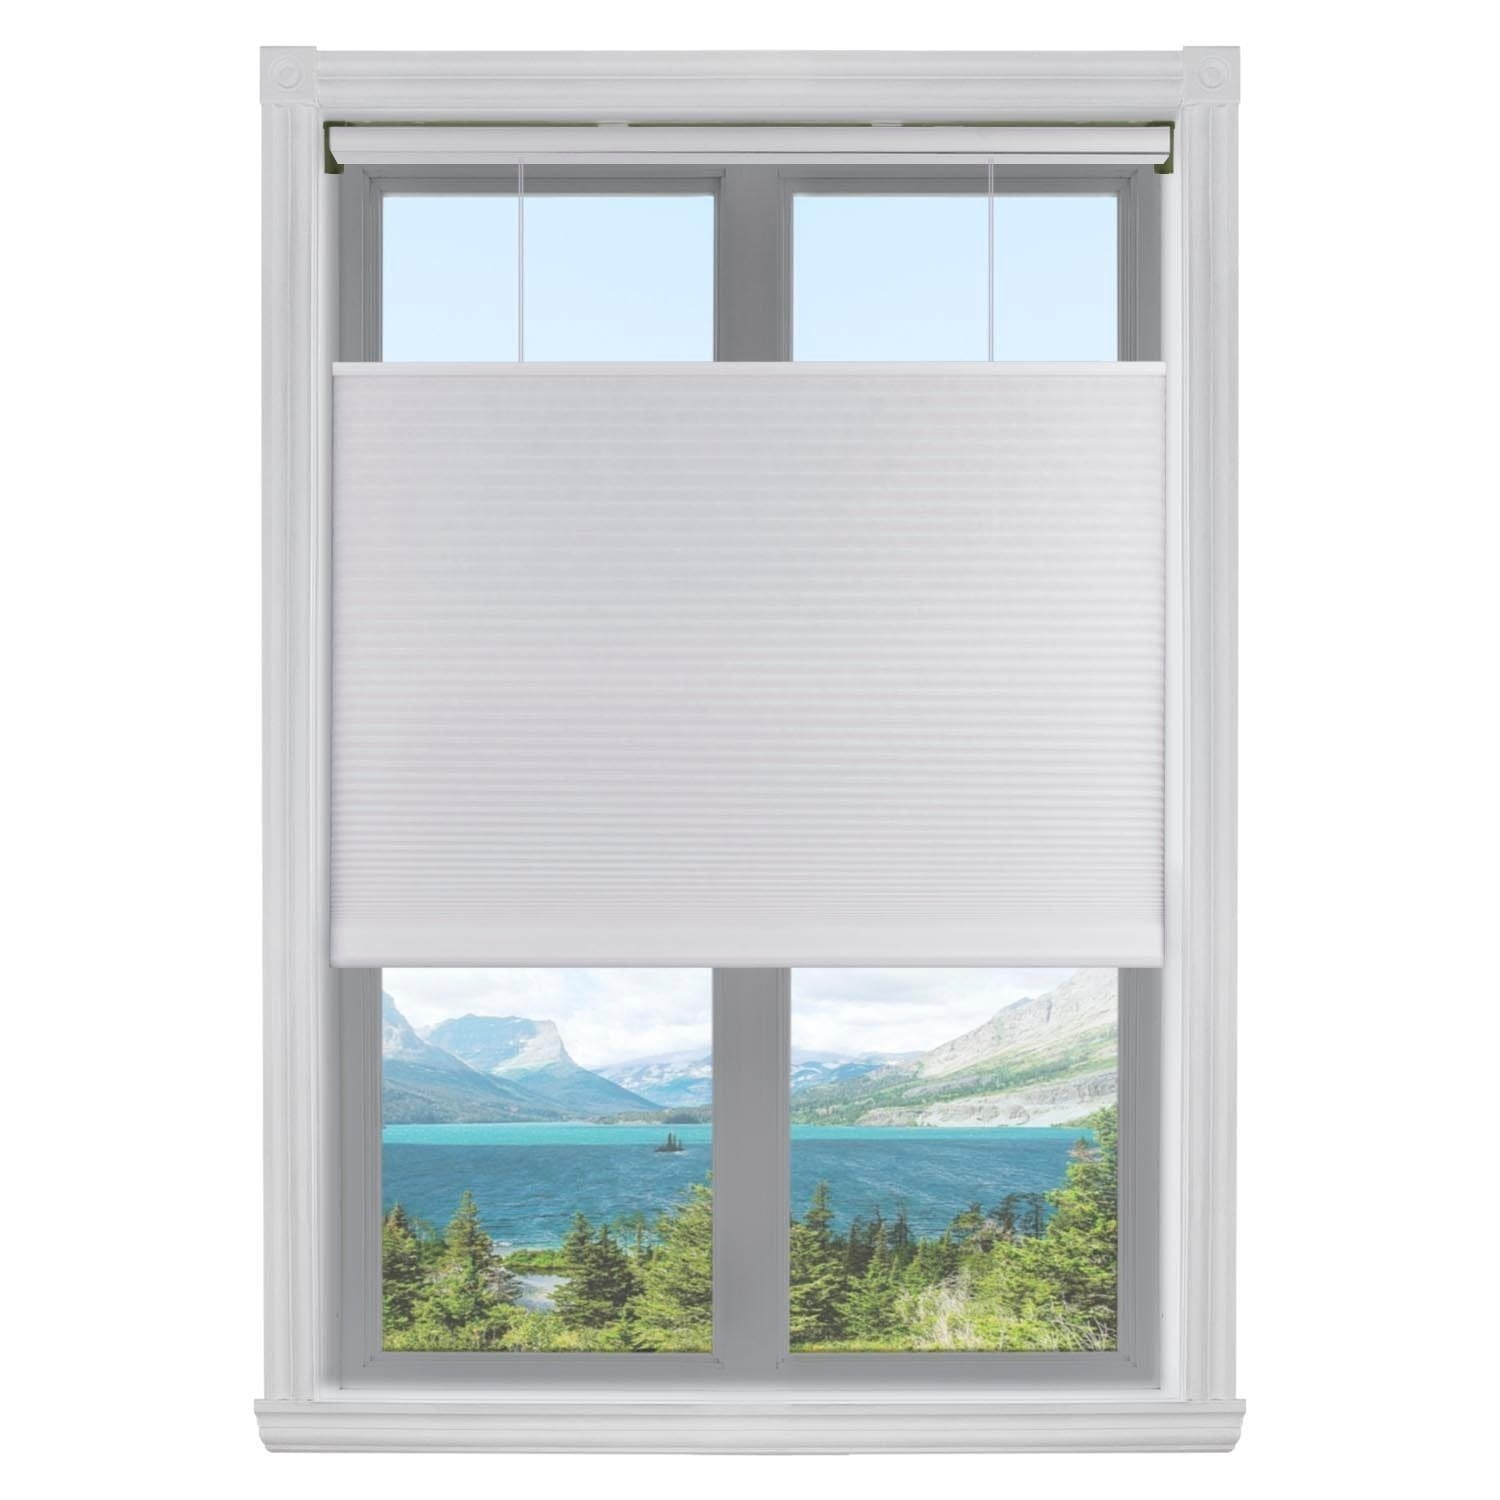 Cordless Fabric Cordless Top Down & Bottom Up Shades Window Blinds 34"W x 64"H 